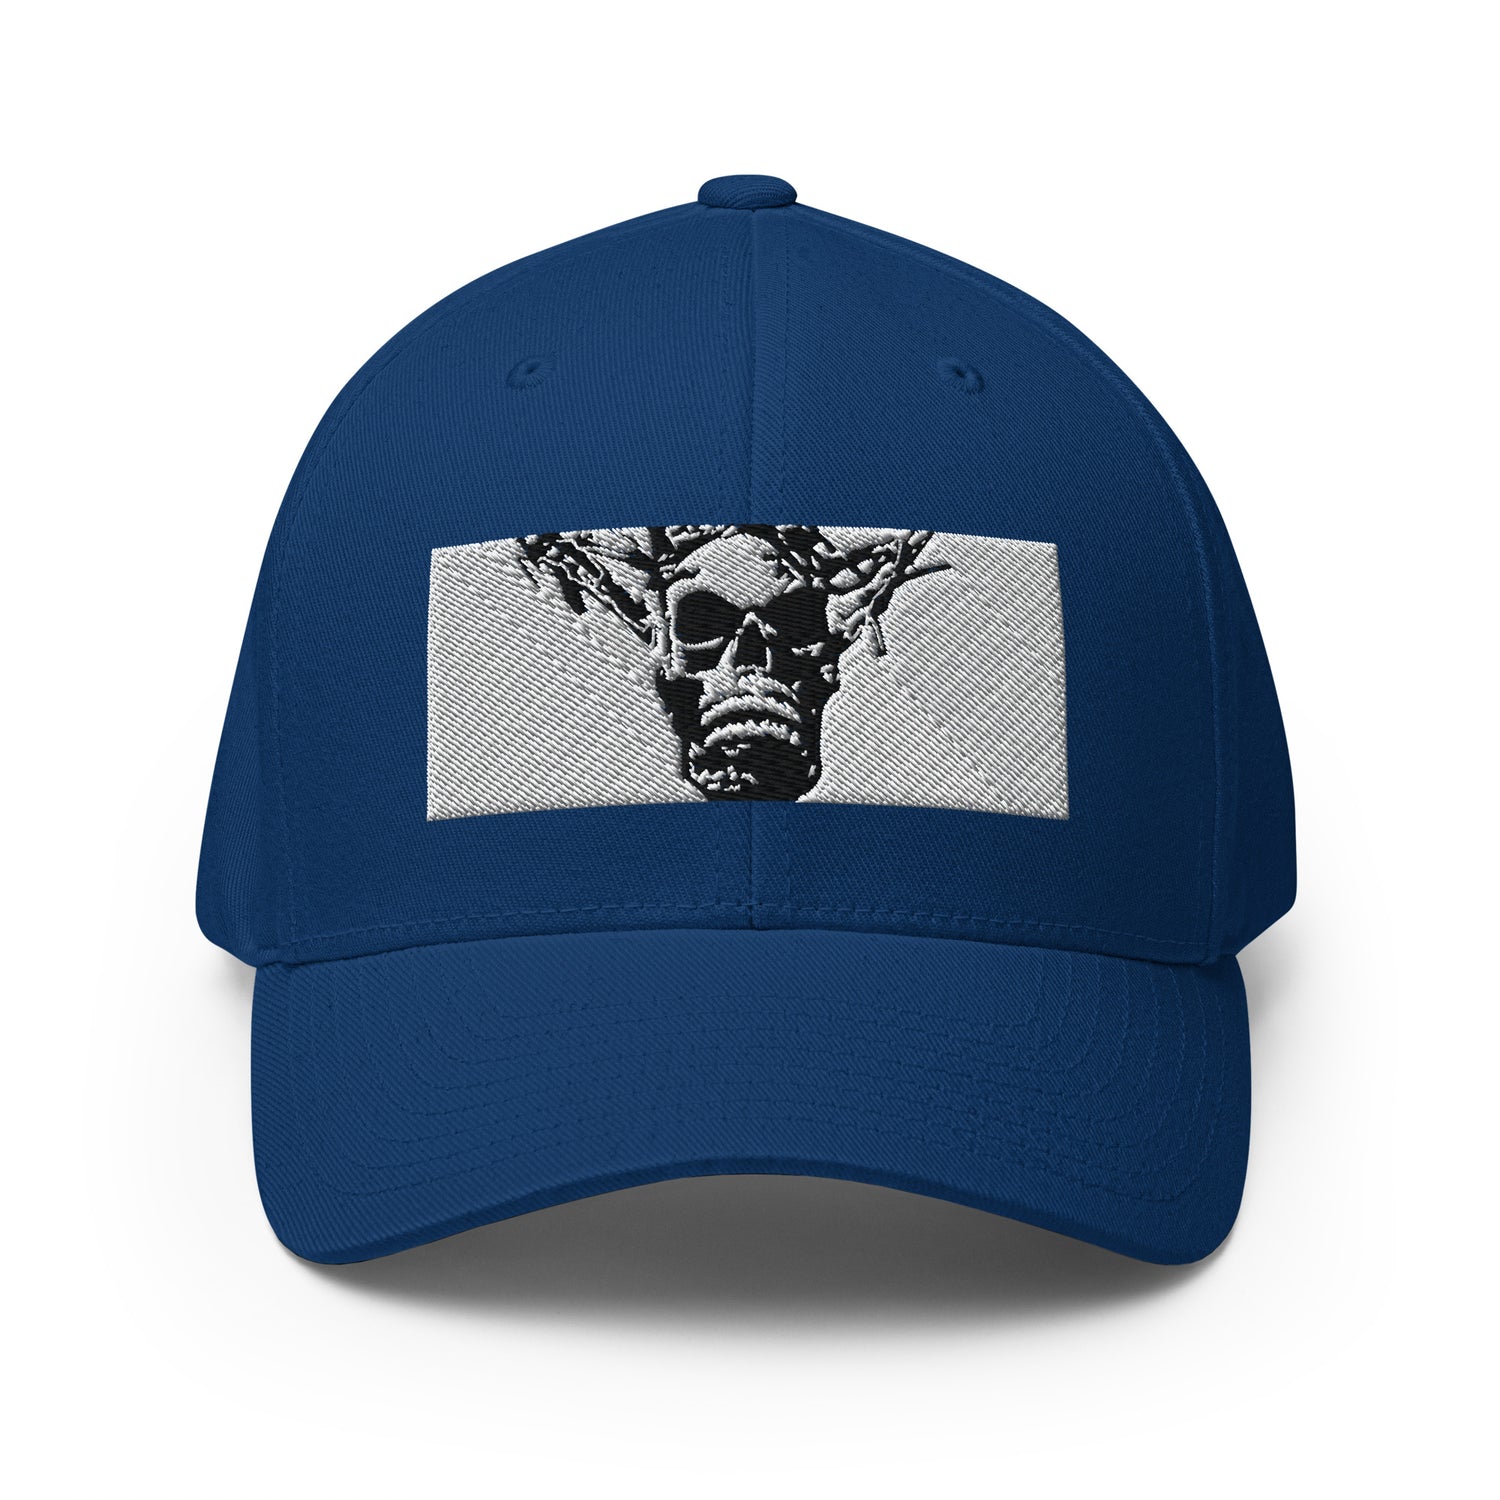 Skull Warrior Stare (Black & White) - Closed Back Structured Hat - Fry1Productions